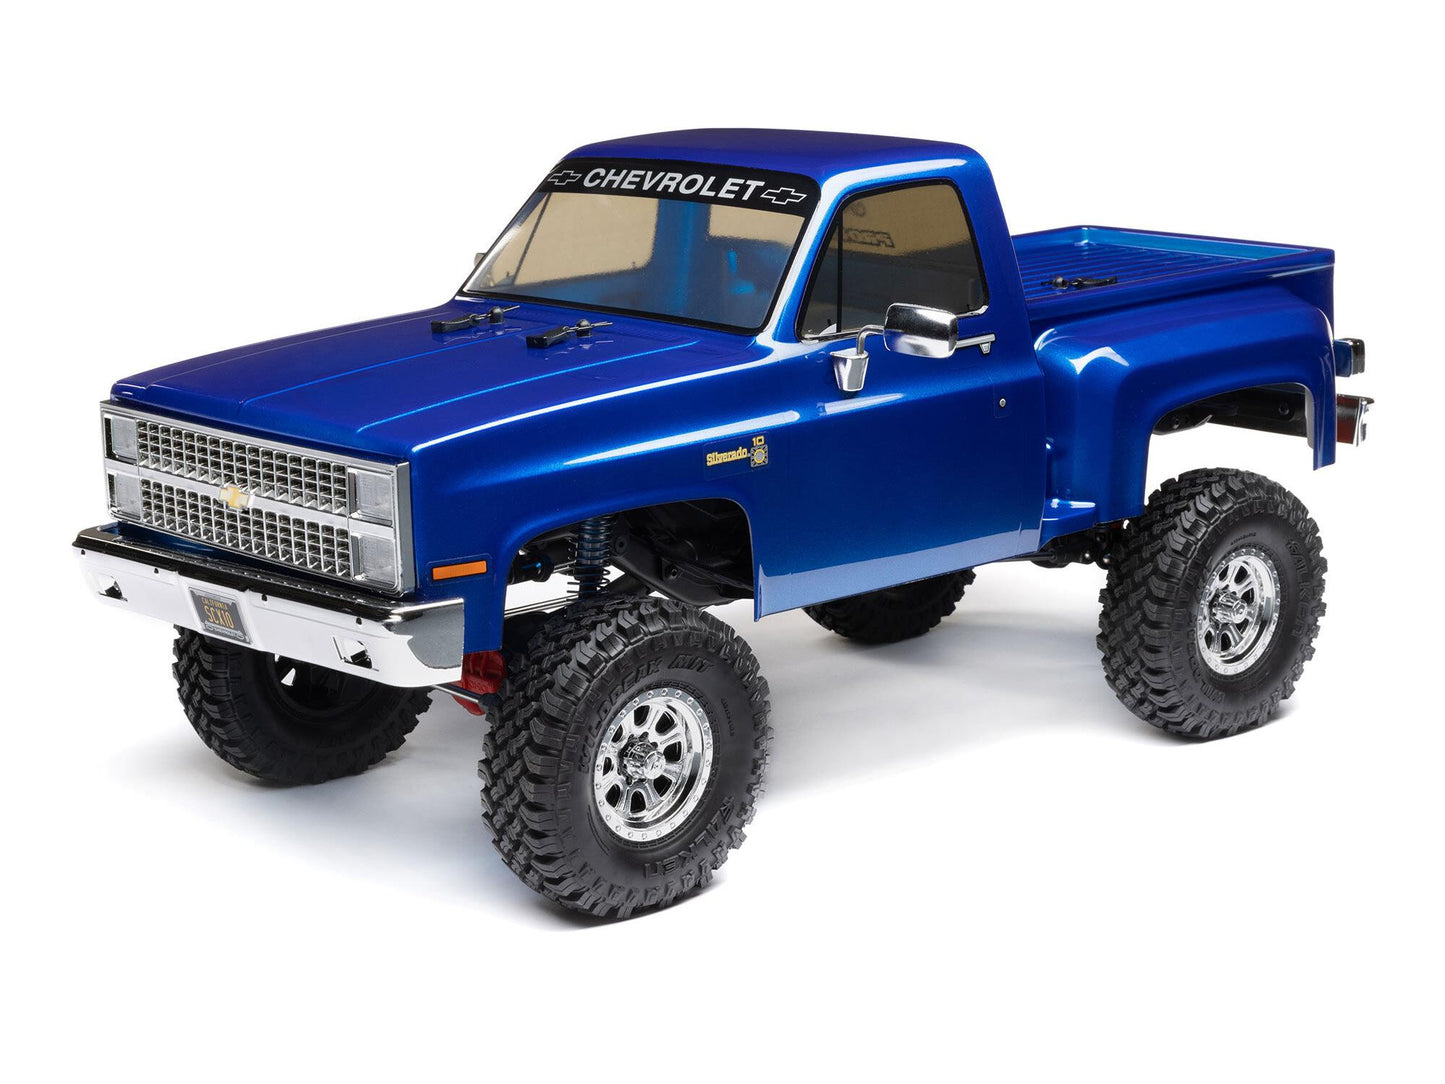 AXIAL 1/10 SCX10 III Base Camp 1982 Chevy K10 4X4 RTR, Blue  AXI03030T1 /  BLACK AXI03030T2 shadow stock